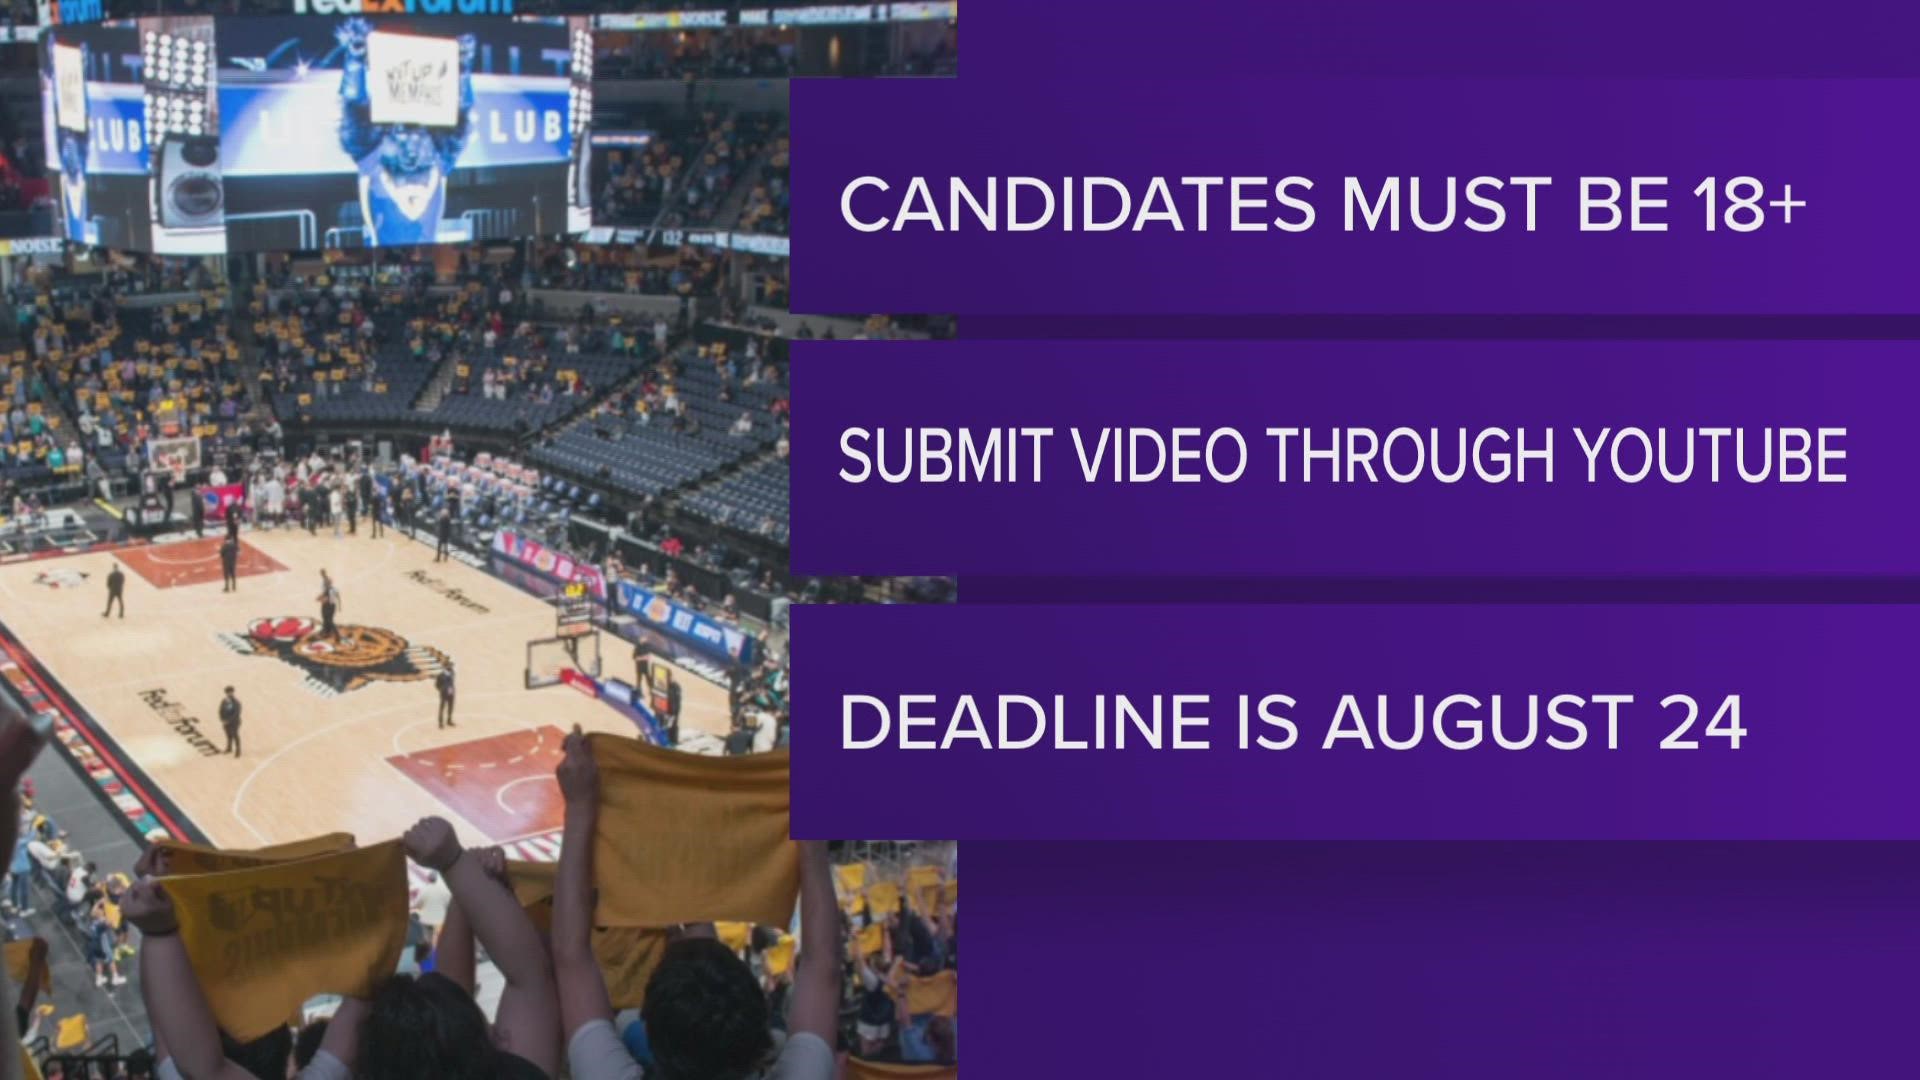 You must be at least 18. Just submit a video until Wednesday, Aug. 24, 2022.